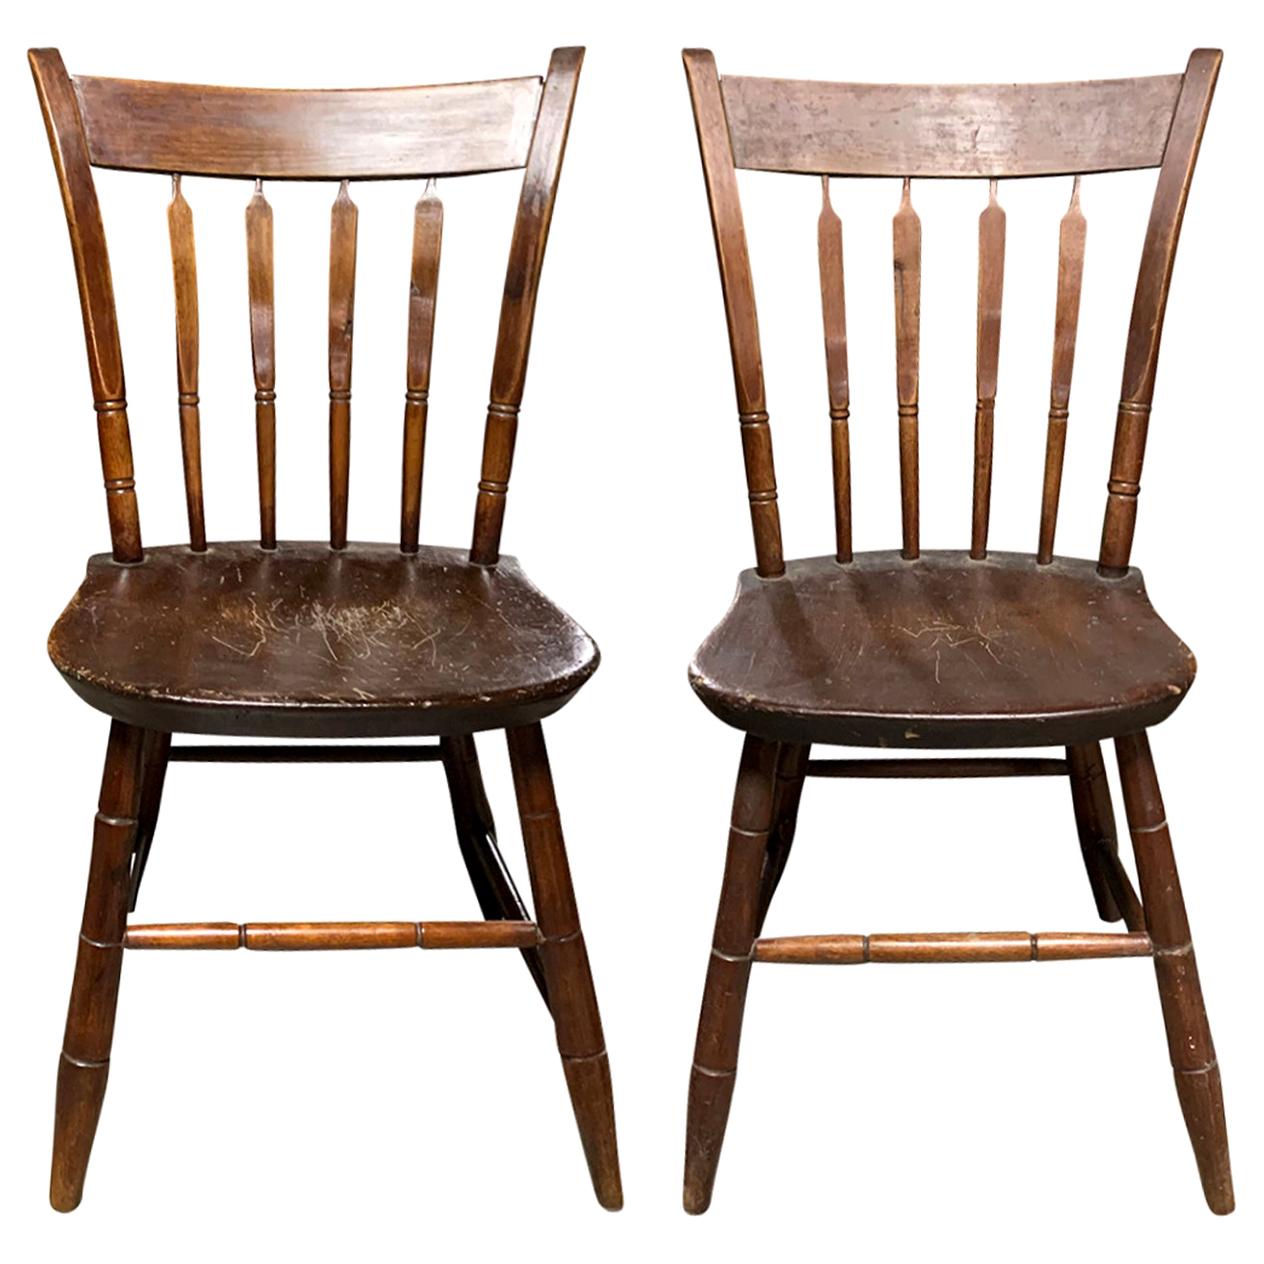 Pair of 19th Century American Side Chairs